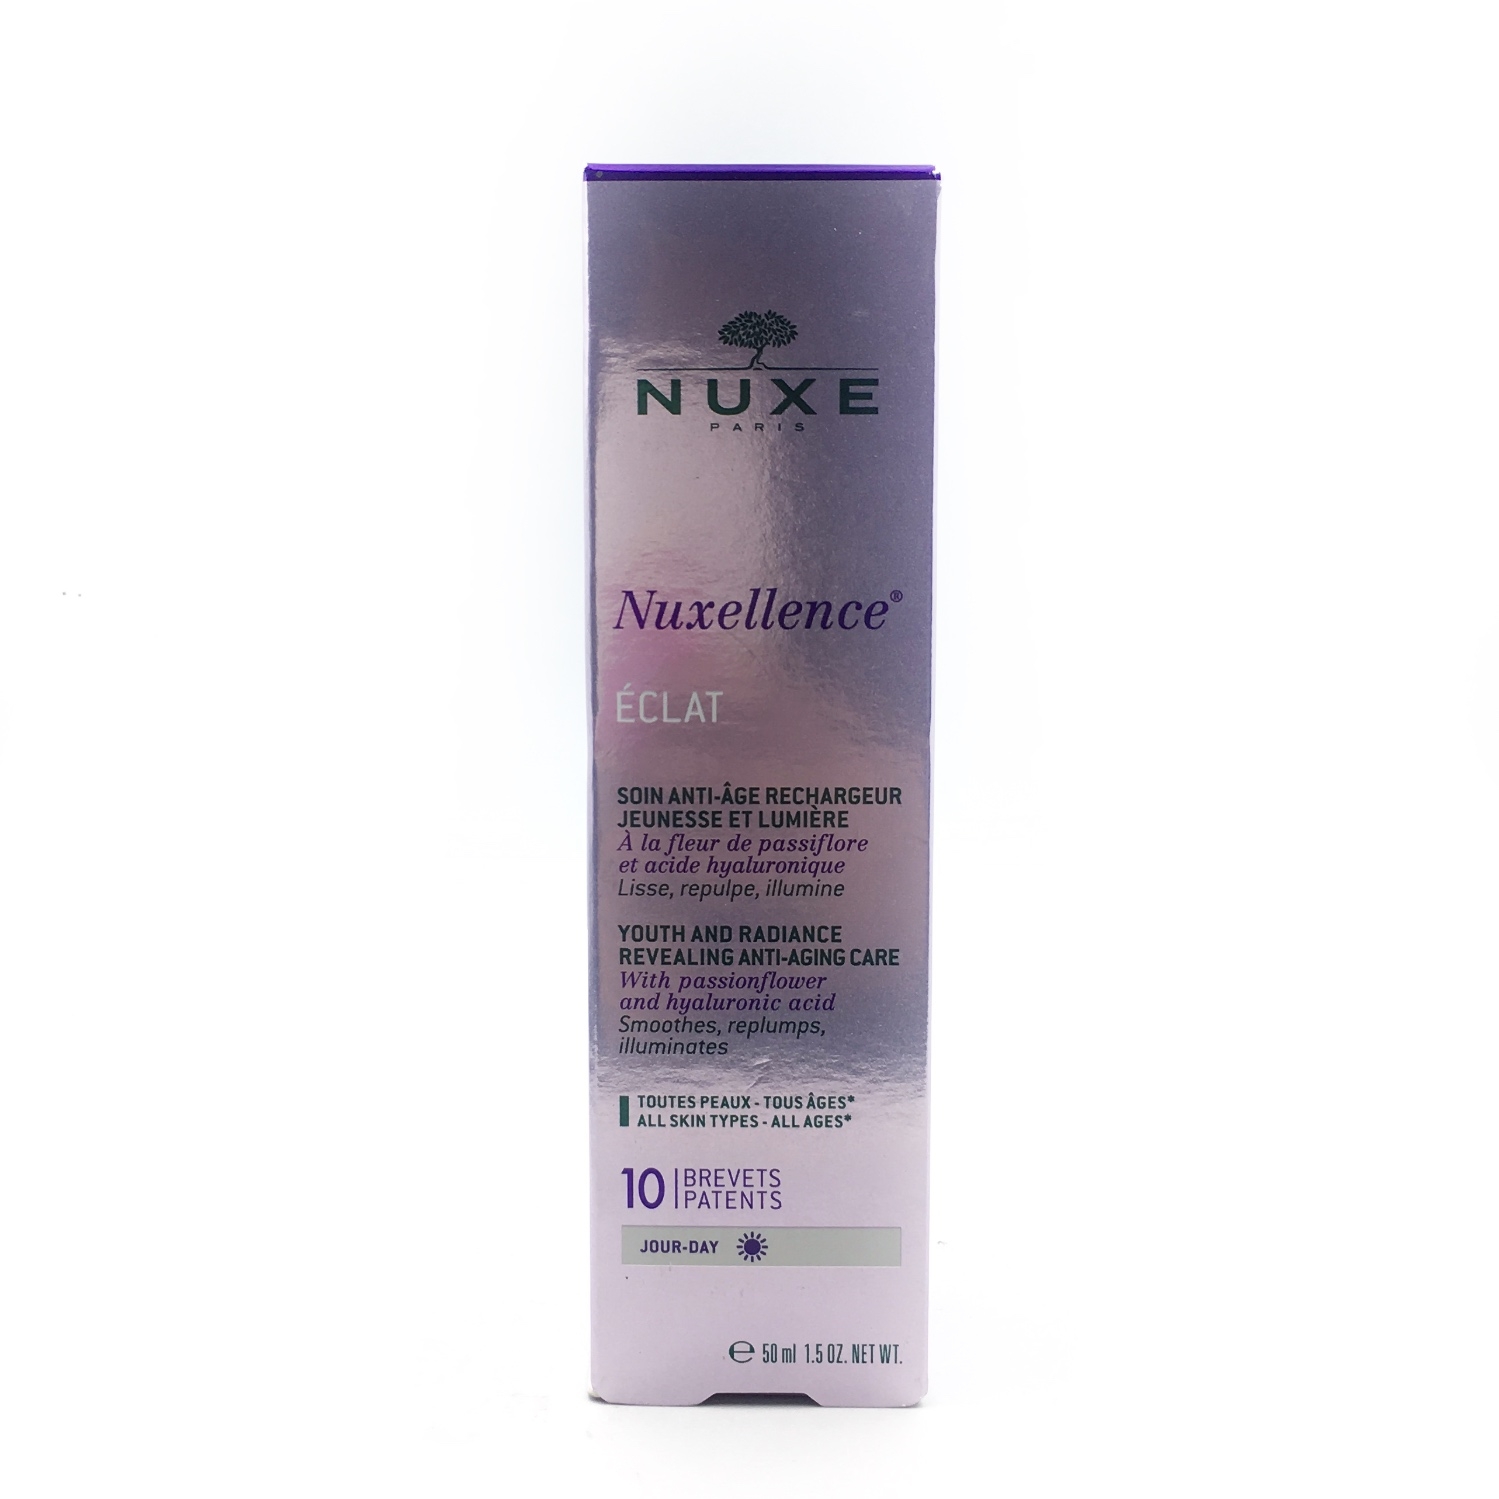 Nuxe Nuxellence Eclat Youth And RAdiance Revealing Anti-Aging Care Skin Care